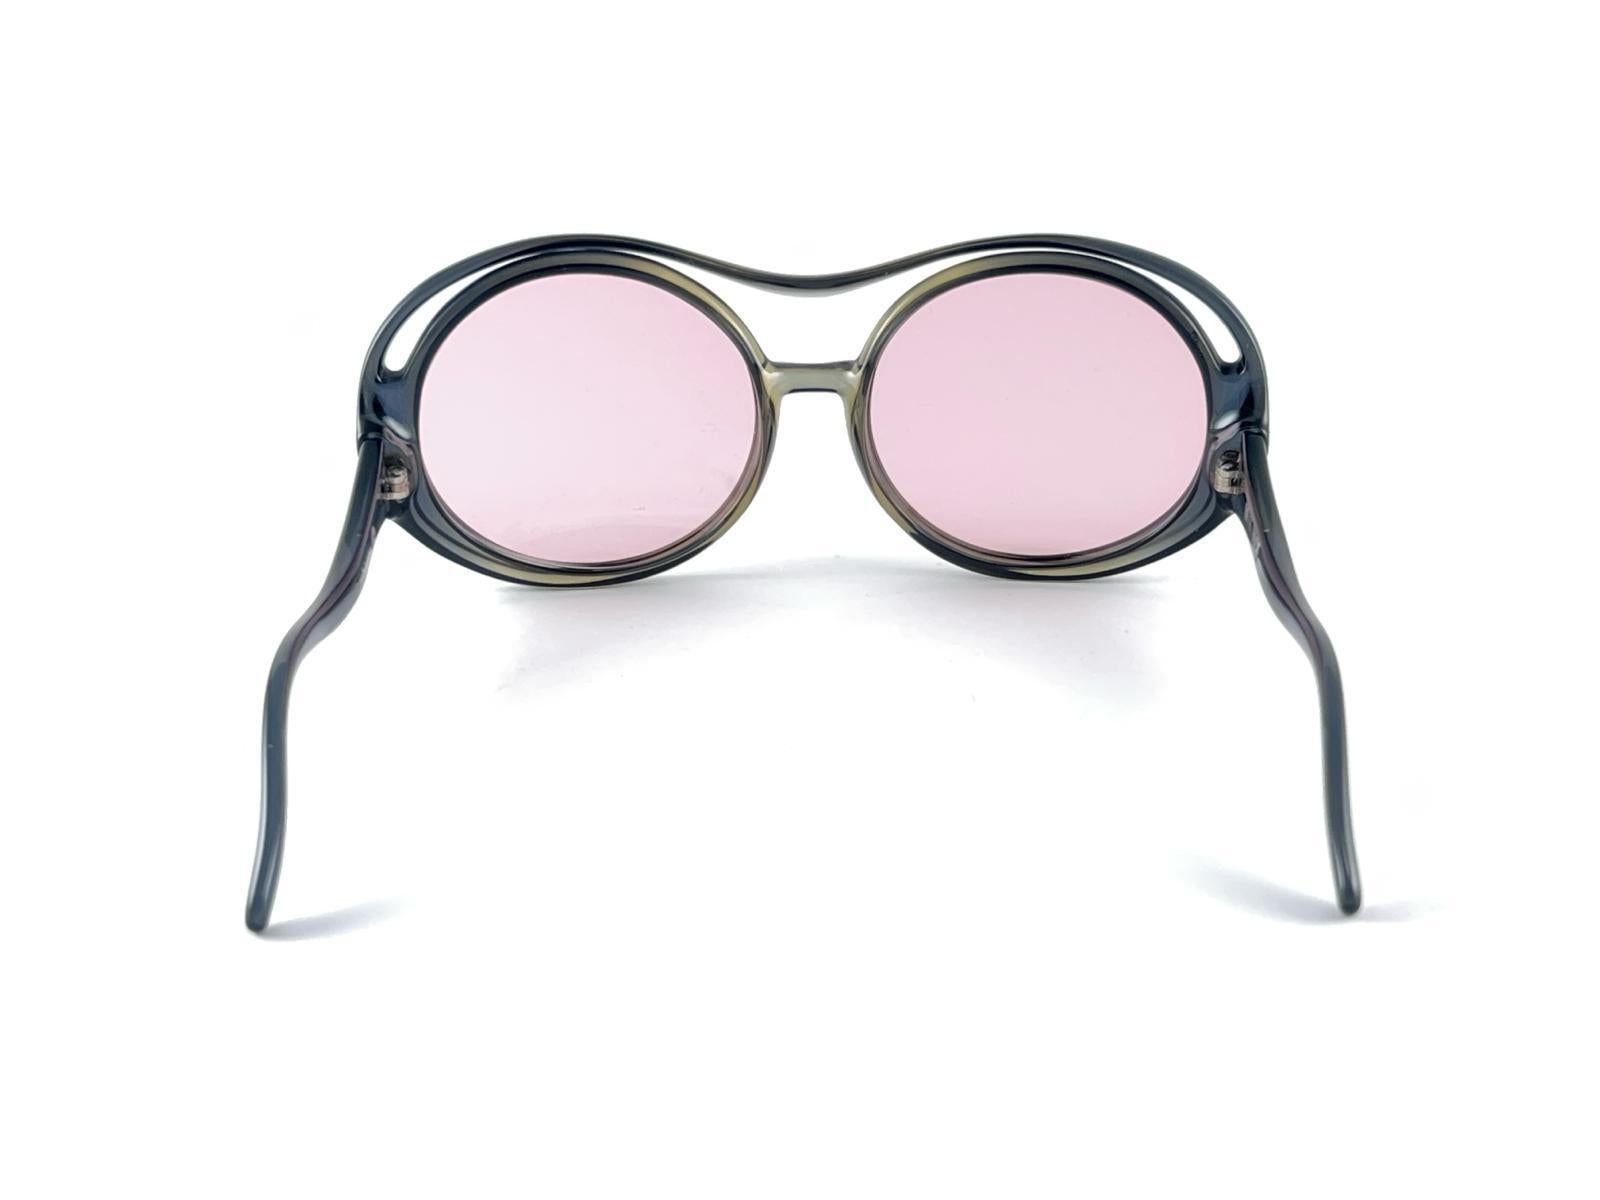  Miss Dior Vintage Oversized Optyl Collectors Item P02 Sunglasses Austria In Excellent Condition For Sale In Baleares, Baleares